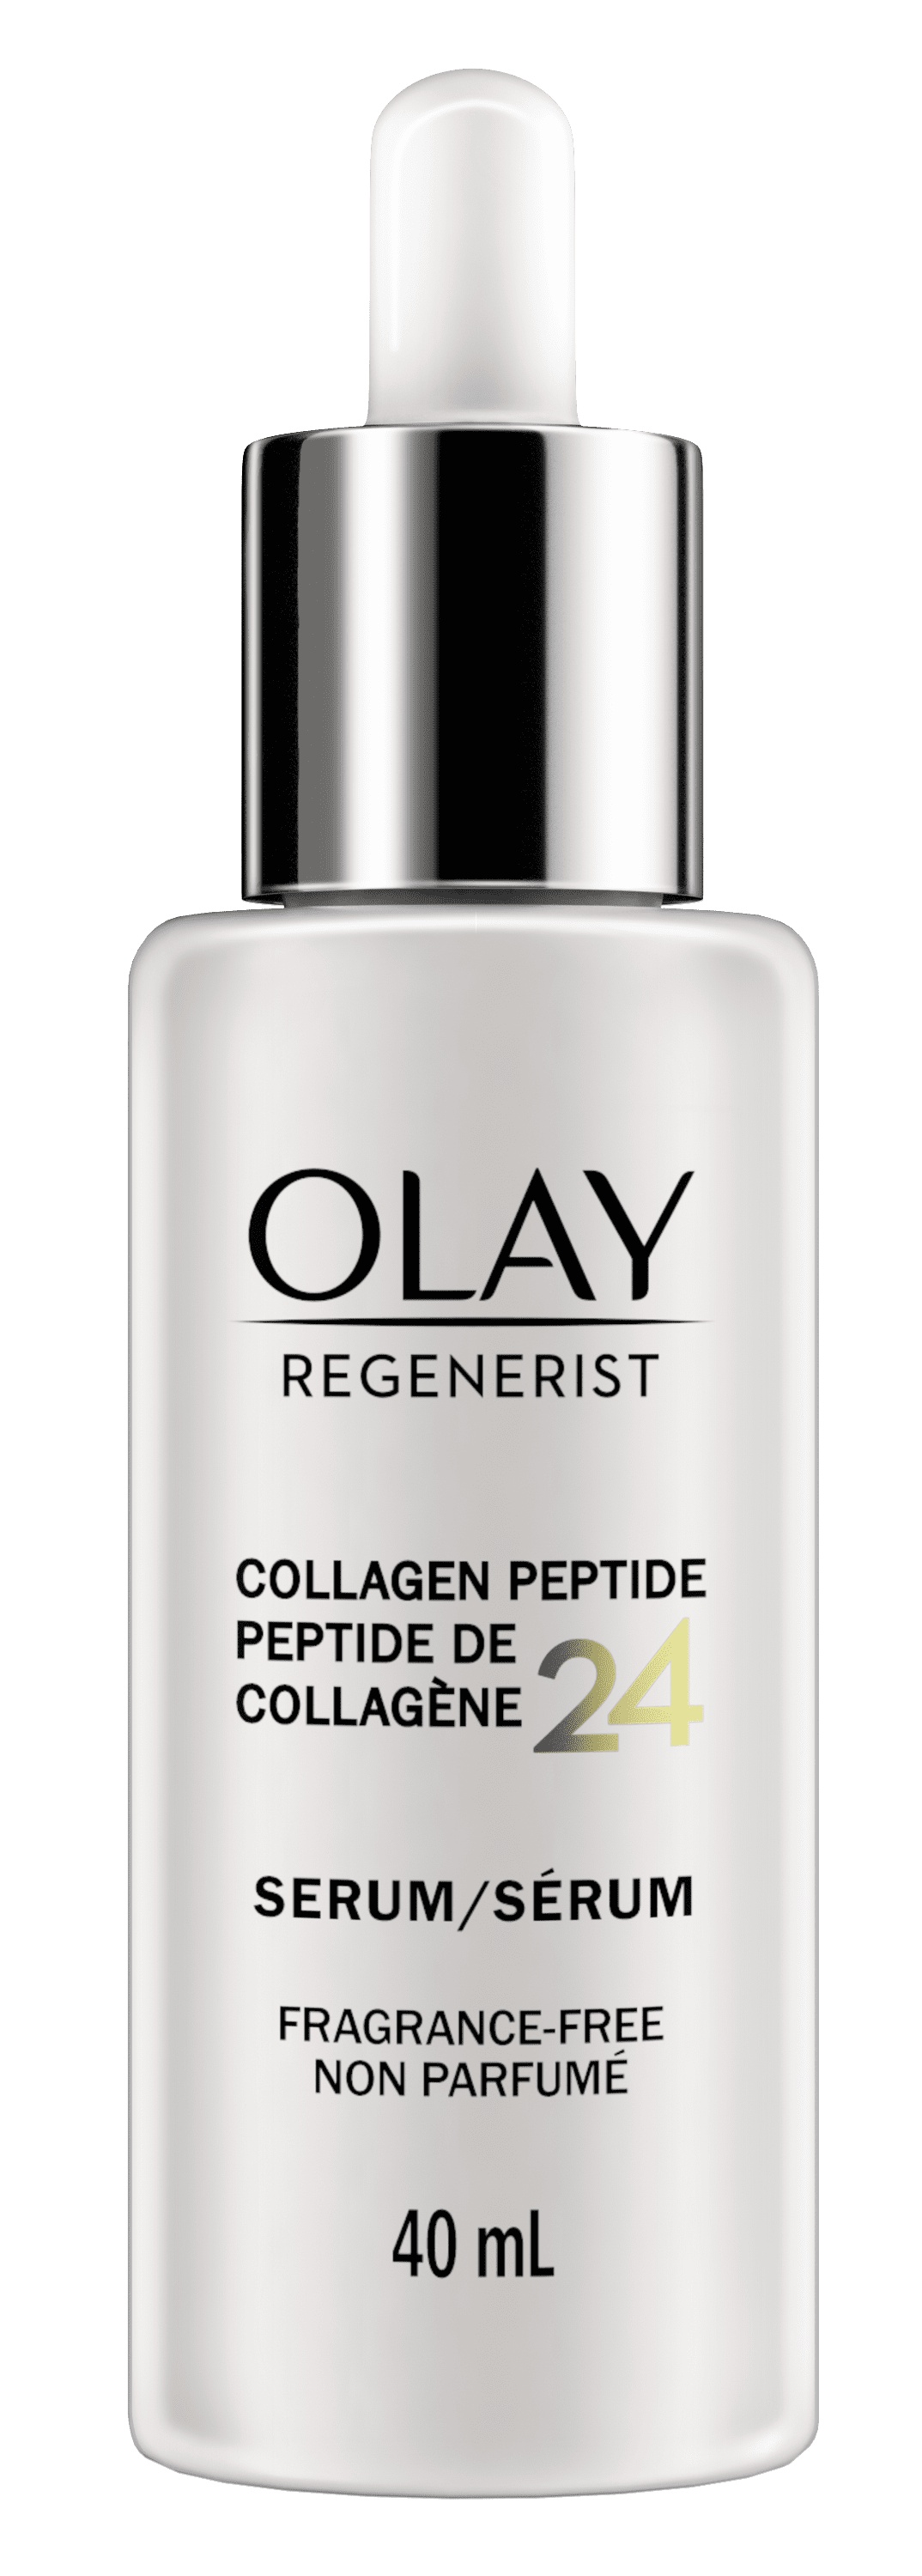 Olay Regenerist Collagen Peptide 24 Day Serum Without Fragrance